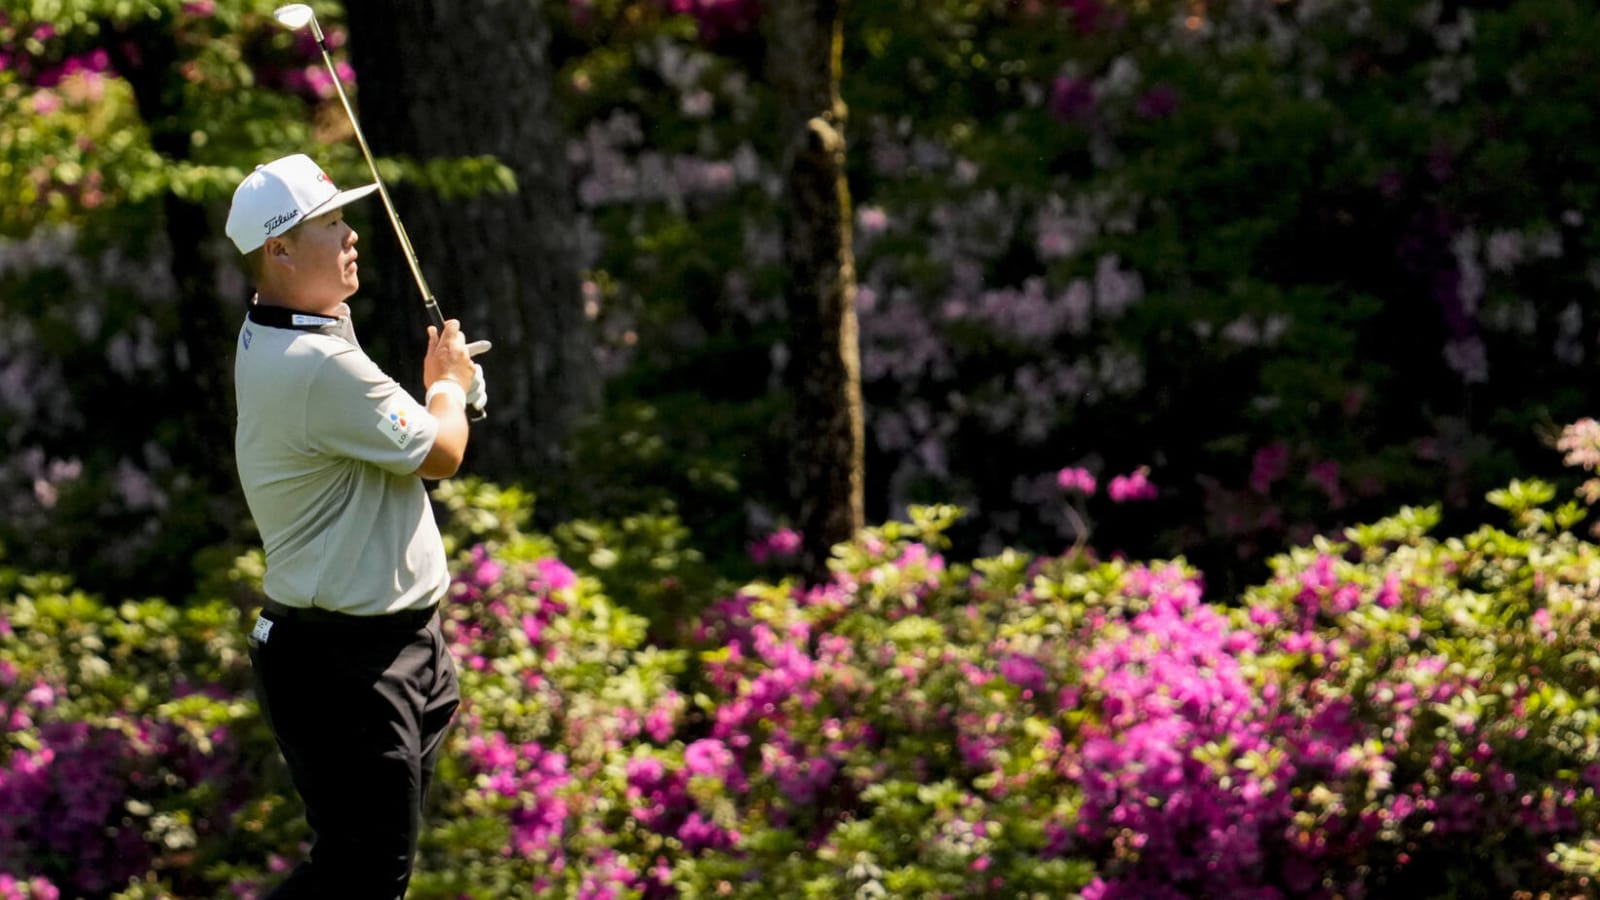 Golf best bets: Long shots to target at The Masters